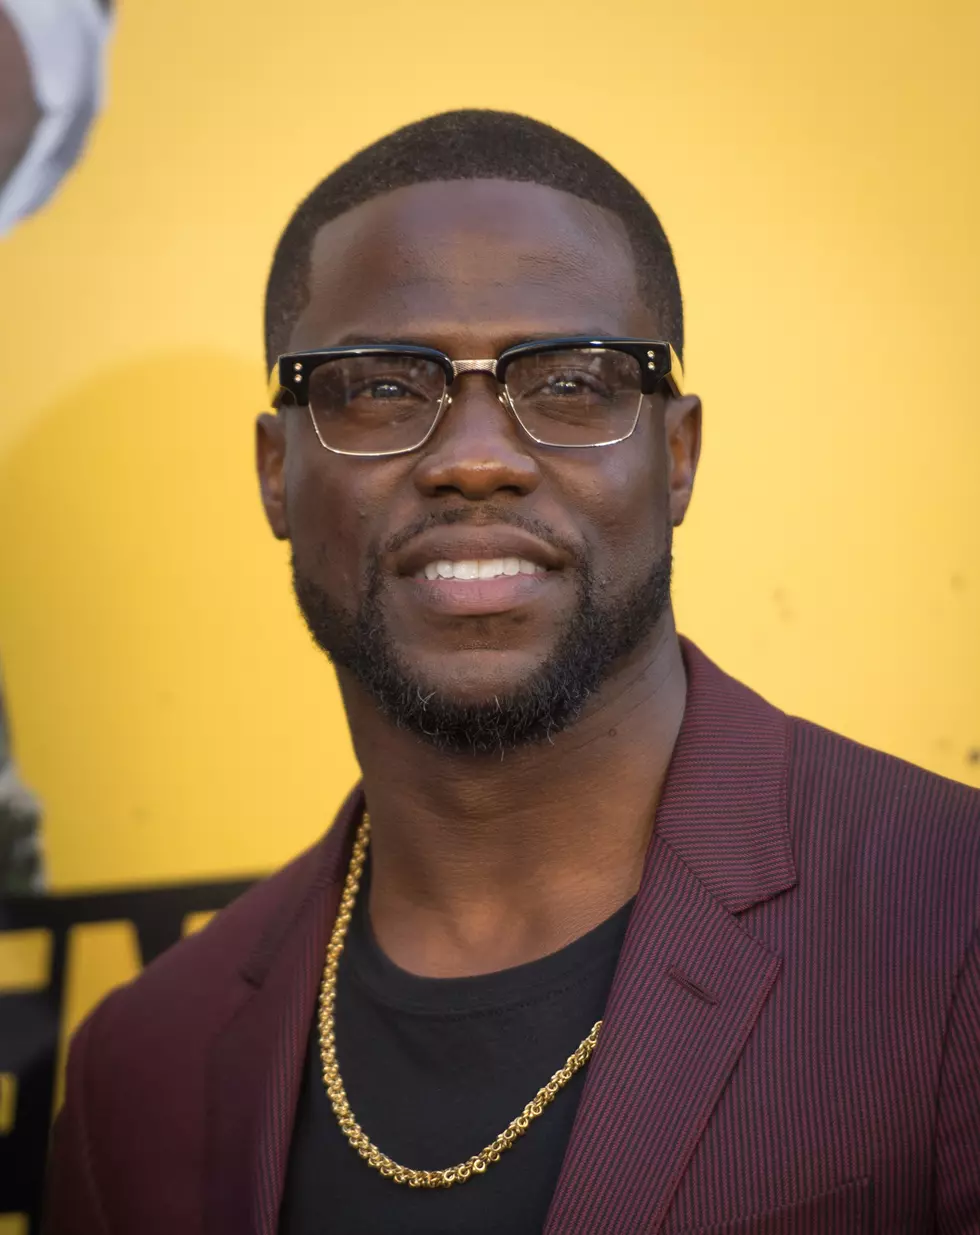 Kevin Hart Apologizes for Cheating after Extortion Threats